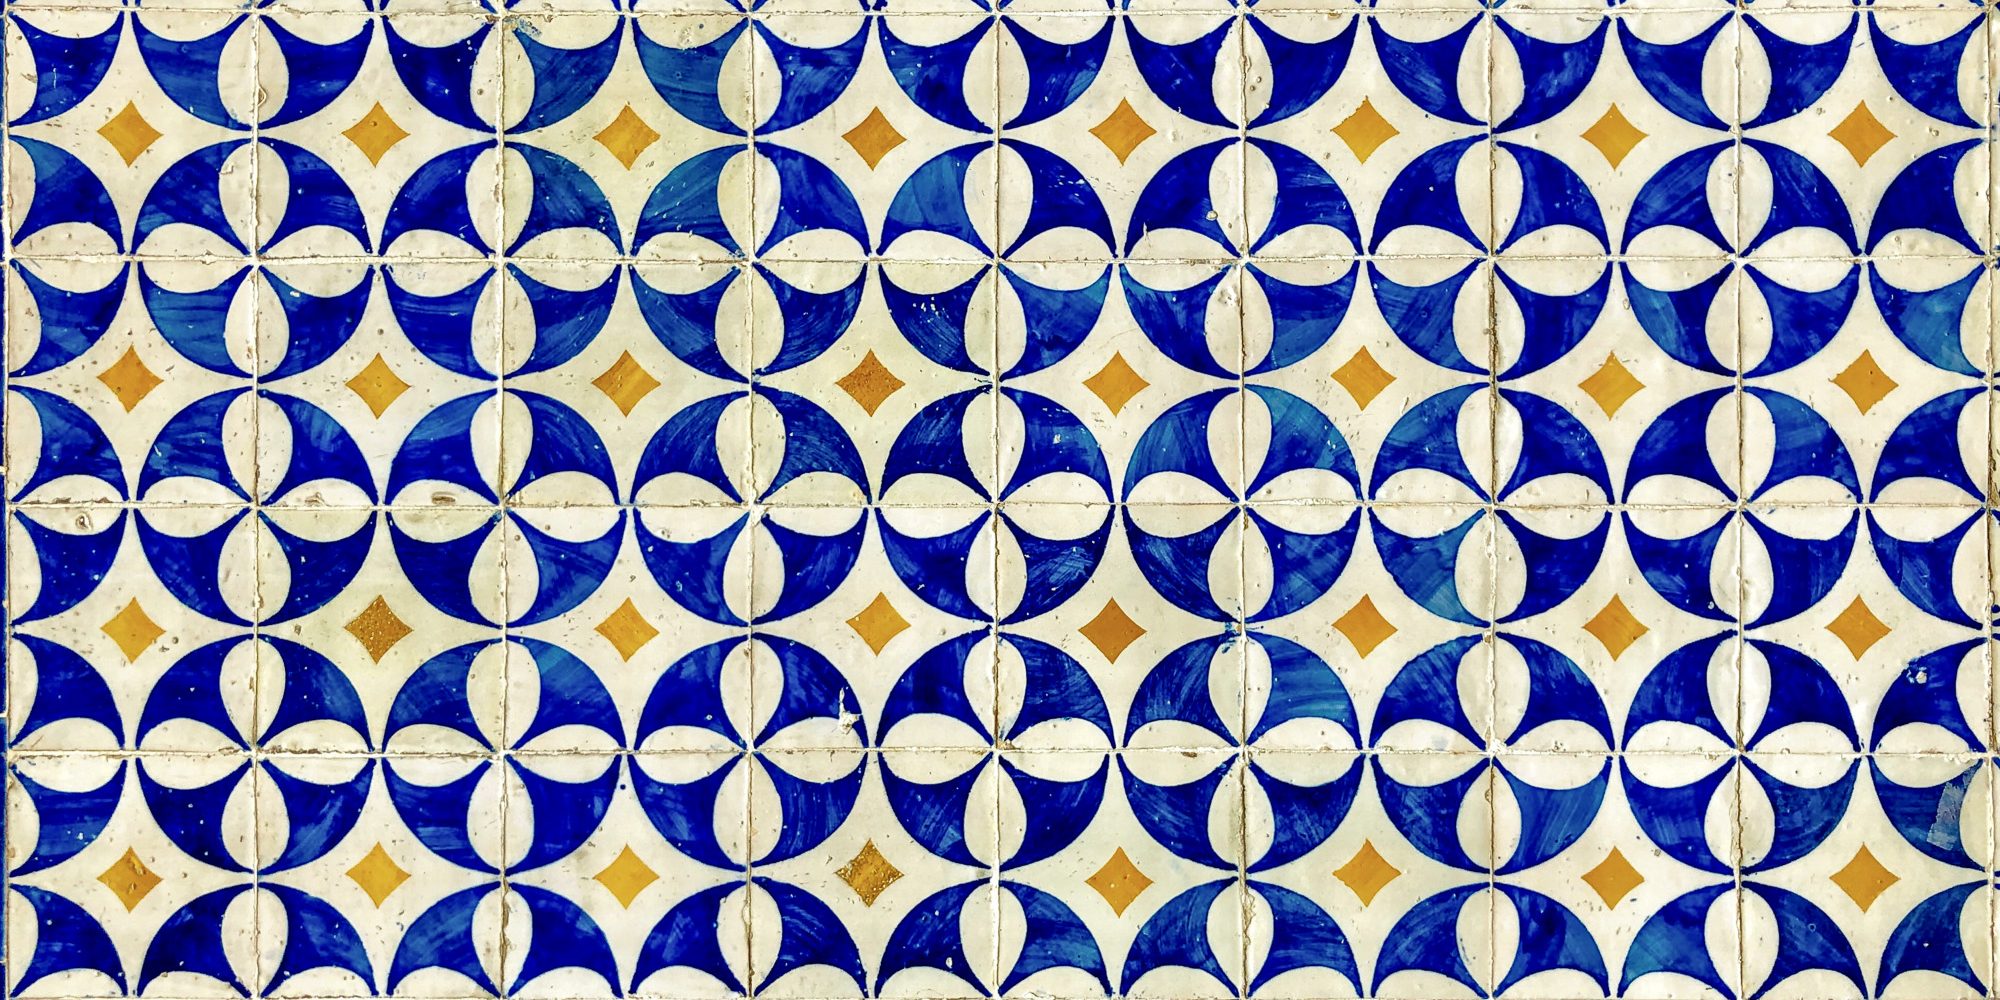 Beautiful Portuguese tiles with a deep blue and yellow motif.jpg